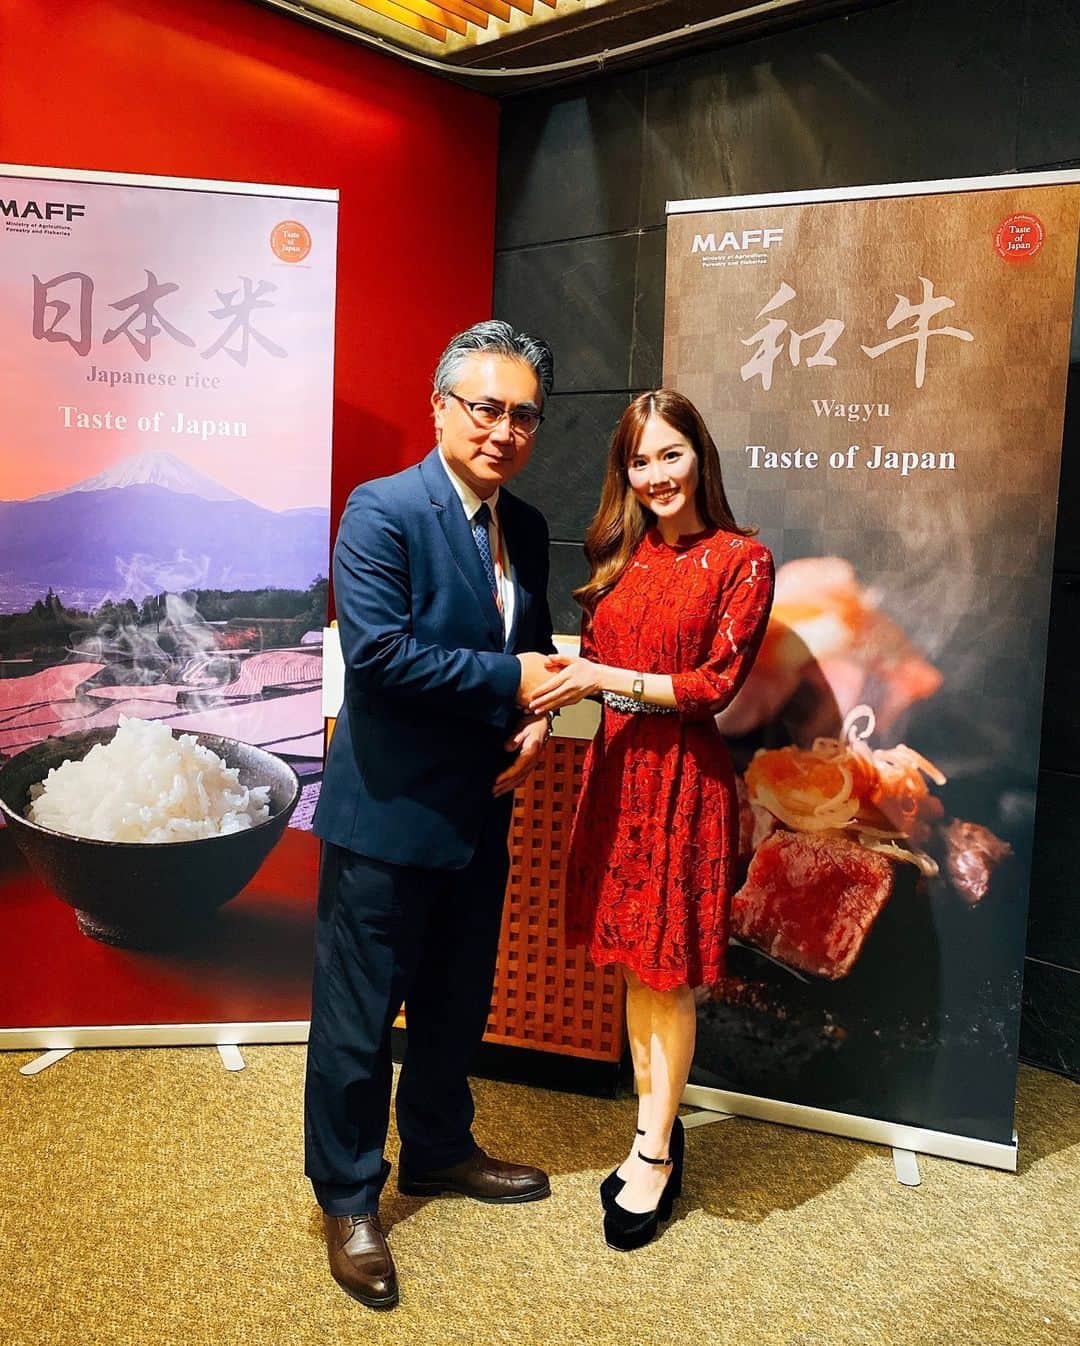 メロディー・モリタさんのインスタグラム写真 - (メロディー・モリタInstagram)「Emceed for an event held by the Japanese Government (Ministry of Agriculture, Forestry and Fisheries of Japan)😊🎤🇯🇵🇺🇸  Following the deactivation of import restrictions on Japanese food in the U.S. last September, this event was designed for food professionals here and in Japan to draw inspiration for new gastronomy in NY through Japanese food culture and products. The event was held twice with limited and spaced out seating per COVID-19 guidelines, but the guests' speeches, live presentations and global chefs' marvelous dishes created a warm environment.☺️  I am grateful for the continued partnership with the Japanese government over the years and look forward to continue helping to spread Japanese culture globally. Many thanks to everyone involved in making the events happen!  Slides include a glimpse from the event, a photo with Mr. Matsumoto of the Consulate-General of Japan in New York, the beautiful kaiseki bento box, venue, and my MOTD wearing a red dress for Japan.✨  ニューヨークで行われた、日本農林水産省が主催したイベントのMCを務めさせて頂きました✨ 日本からは農林水産審議官、福島県知事も英語でスピーチをされました。  アメリカでの日本産食品の輸入規制が2021年9月に撤廃された為、アメリカの食品業界の方々に日本食品の素晴らしさを感じてもらうイベントとなりました。  コロナ感染対策のためイベントは人数制限で2回に分けられ、着席形式で行われました。本当に久しぶりのニューヨークでの日本政府イベントでご一緒させて頂き、微力ですが私も共にアメリカの方々に日本食の良さを伝えていける様に頑張りたいと改めて思いました。  写真はイベントの様子、美しい懐石弁当、ゲストスピーカーのお一人、在ニューヨーク日本国総領事館  松本 太様と。衣装は日本を意識した赤のドレスにしました😊✨ #NY #MC #日本政府 #農林水産省」2月19日 9時56分 - melodeemorita